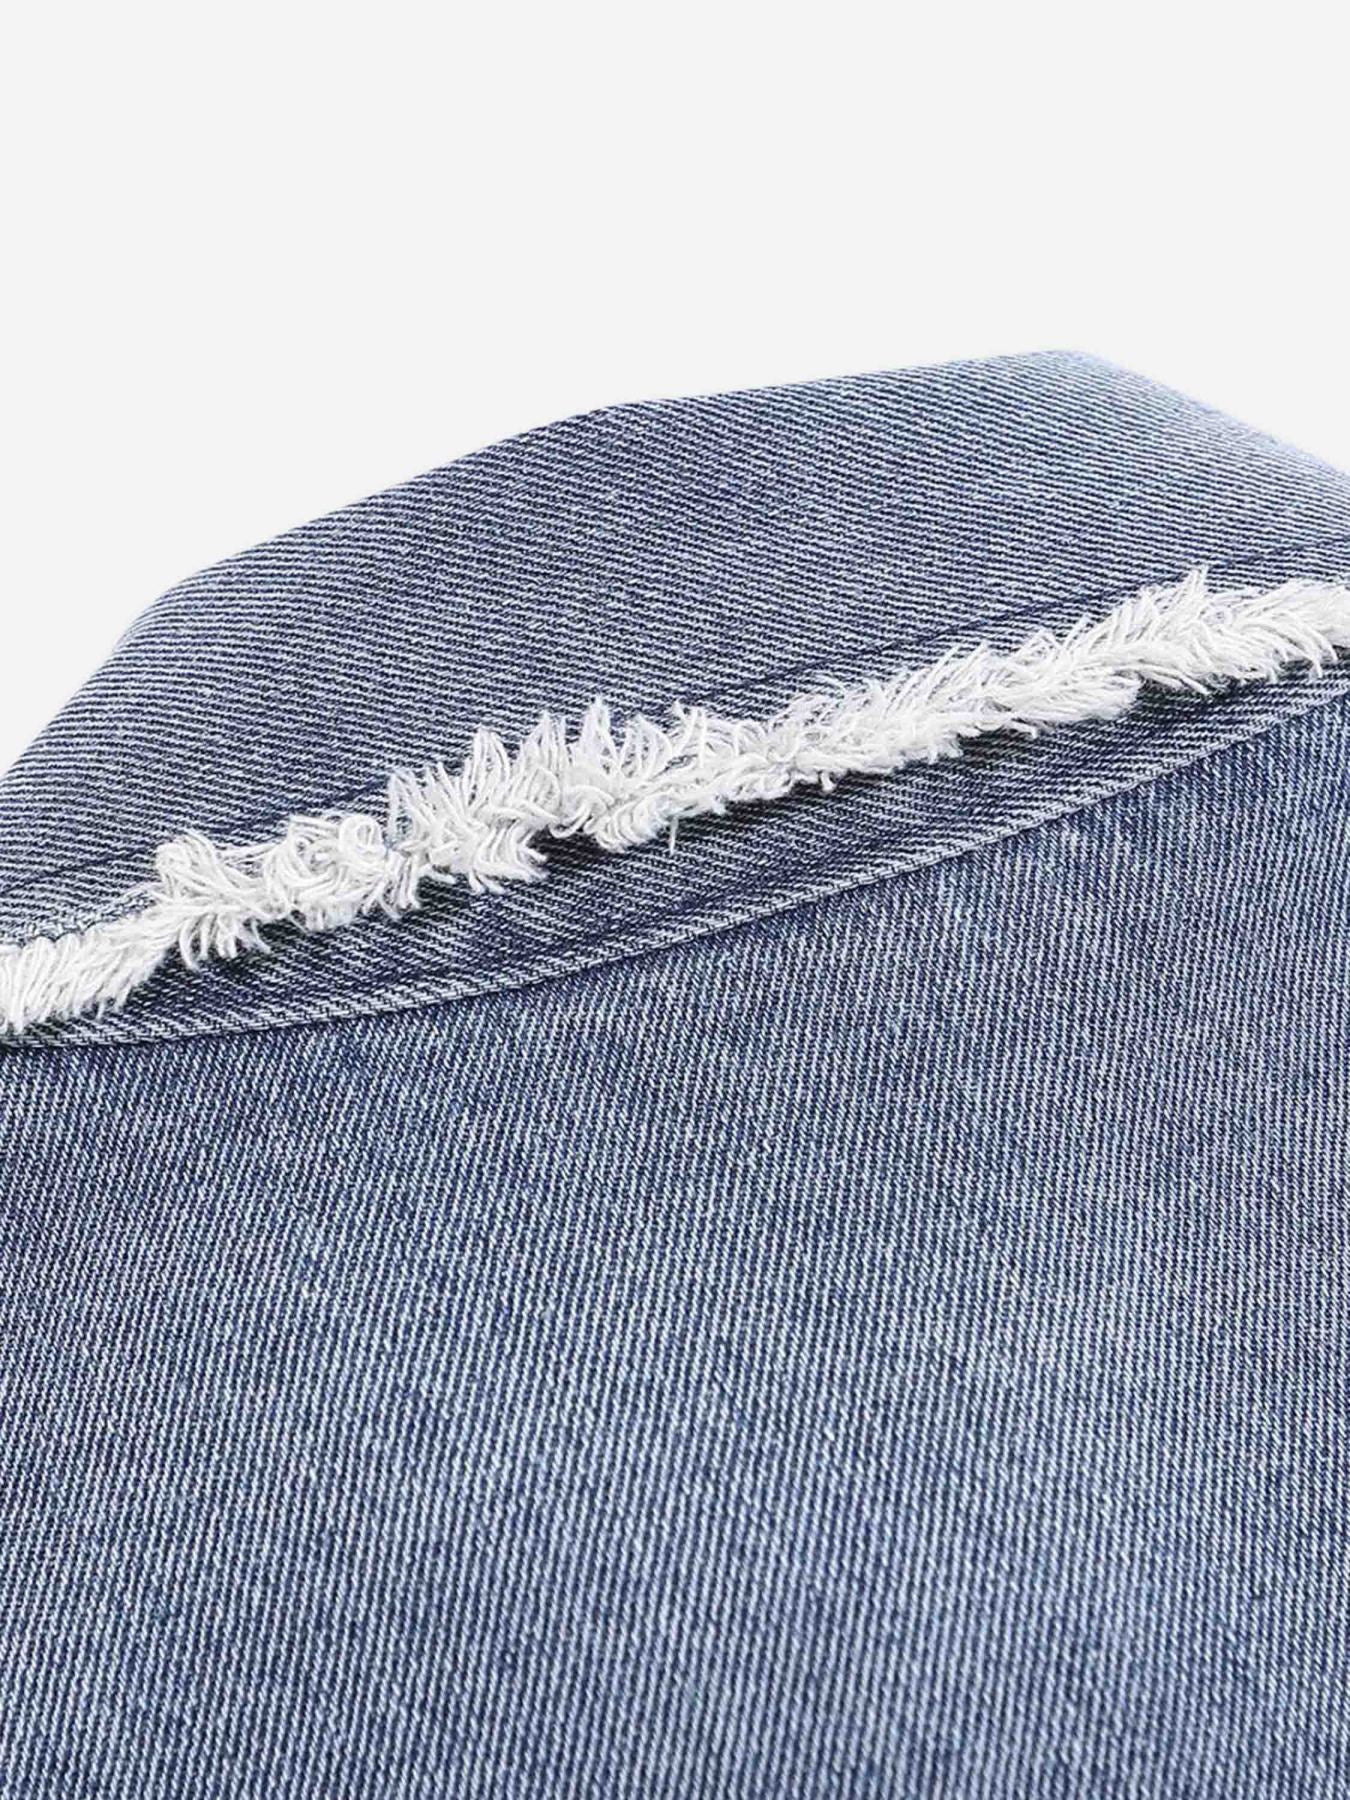 The Supermade Star-embroidered Denim Shirt